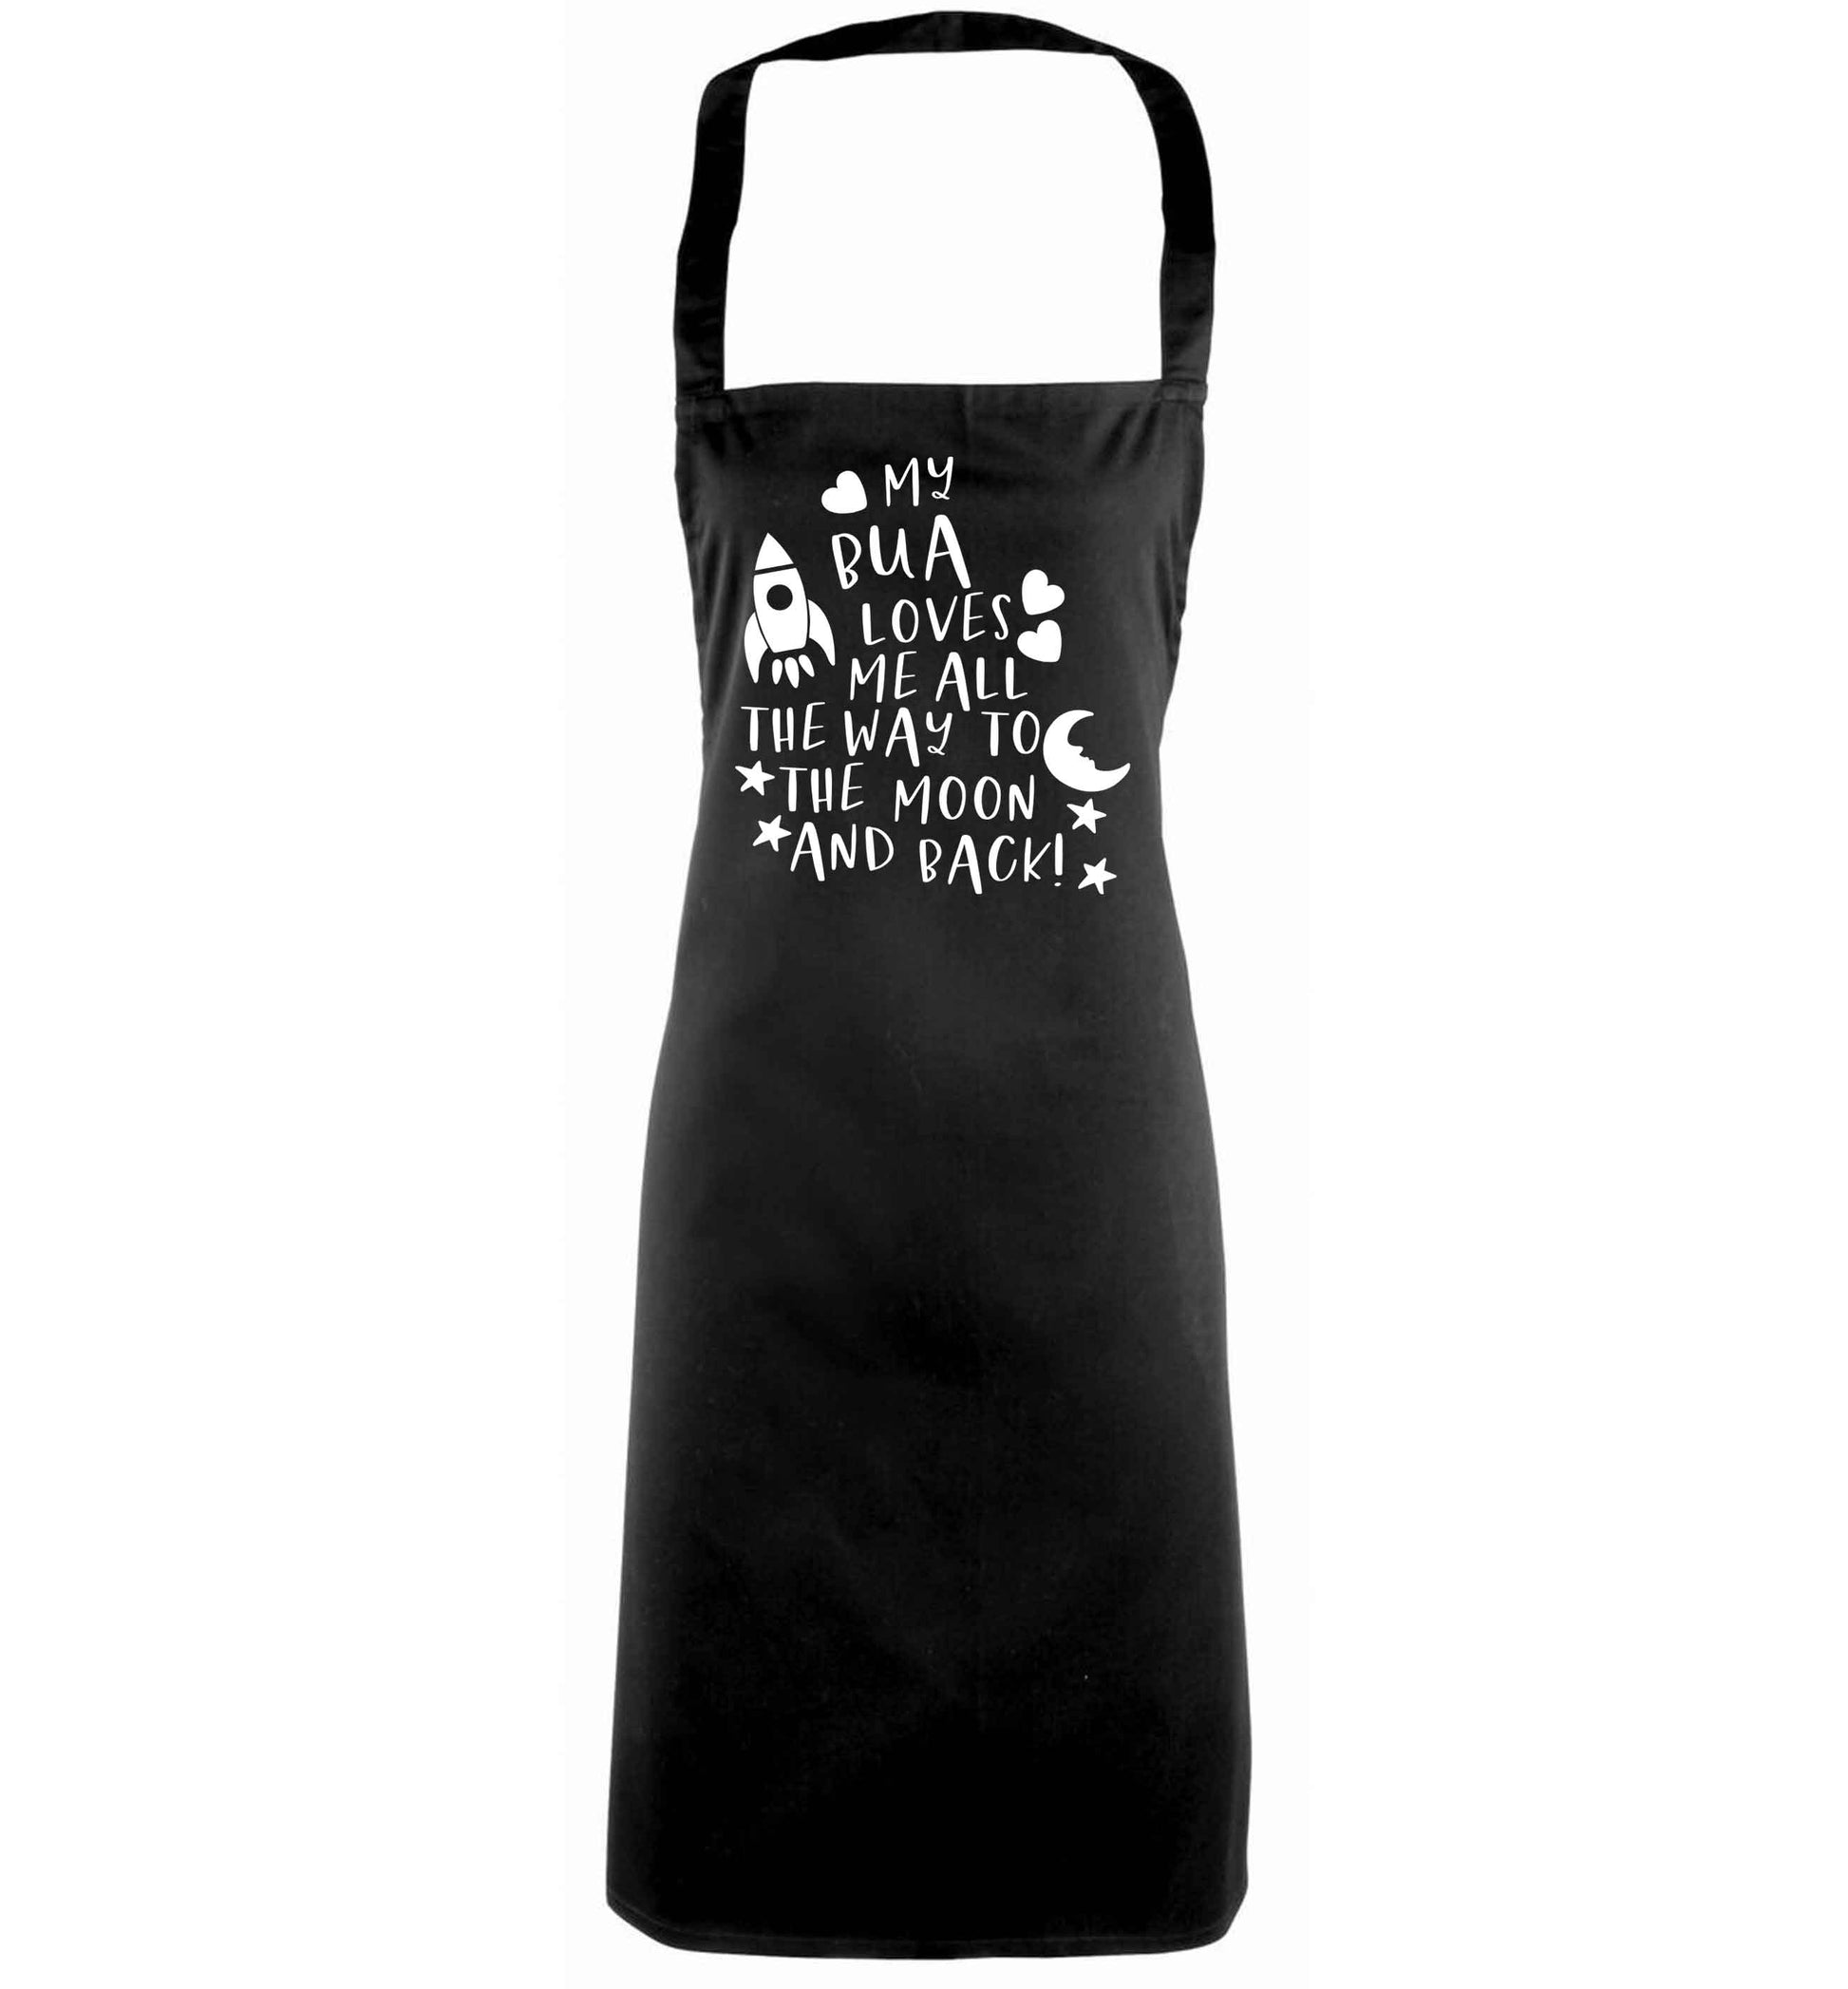 My bua loves me all they way to the moon and back black apron